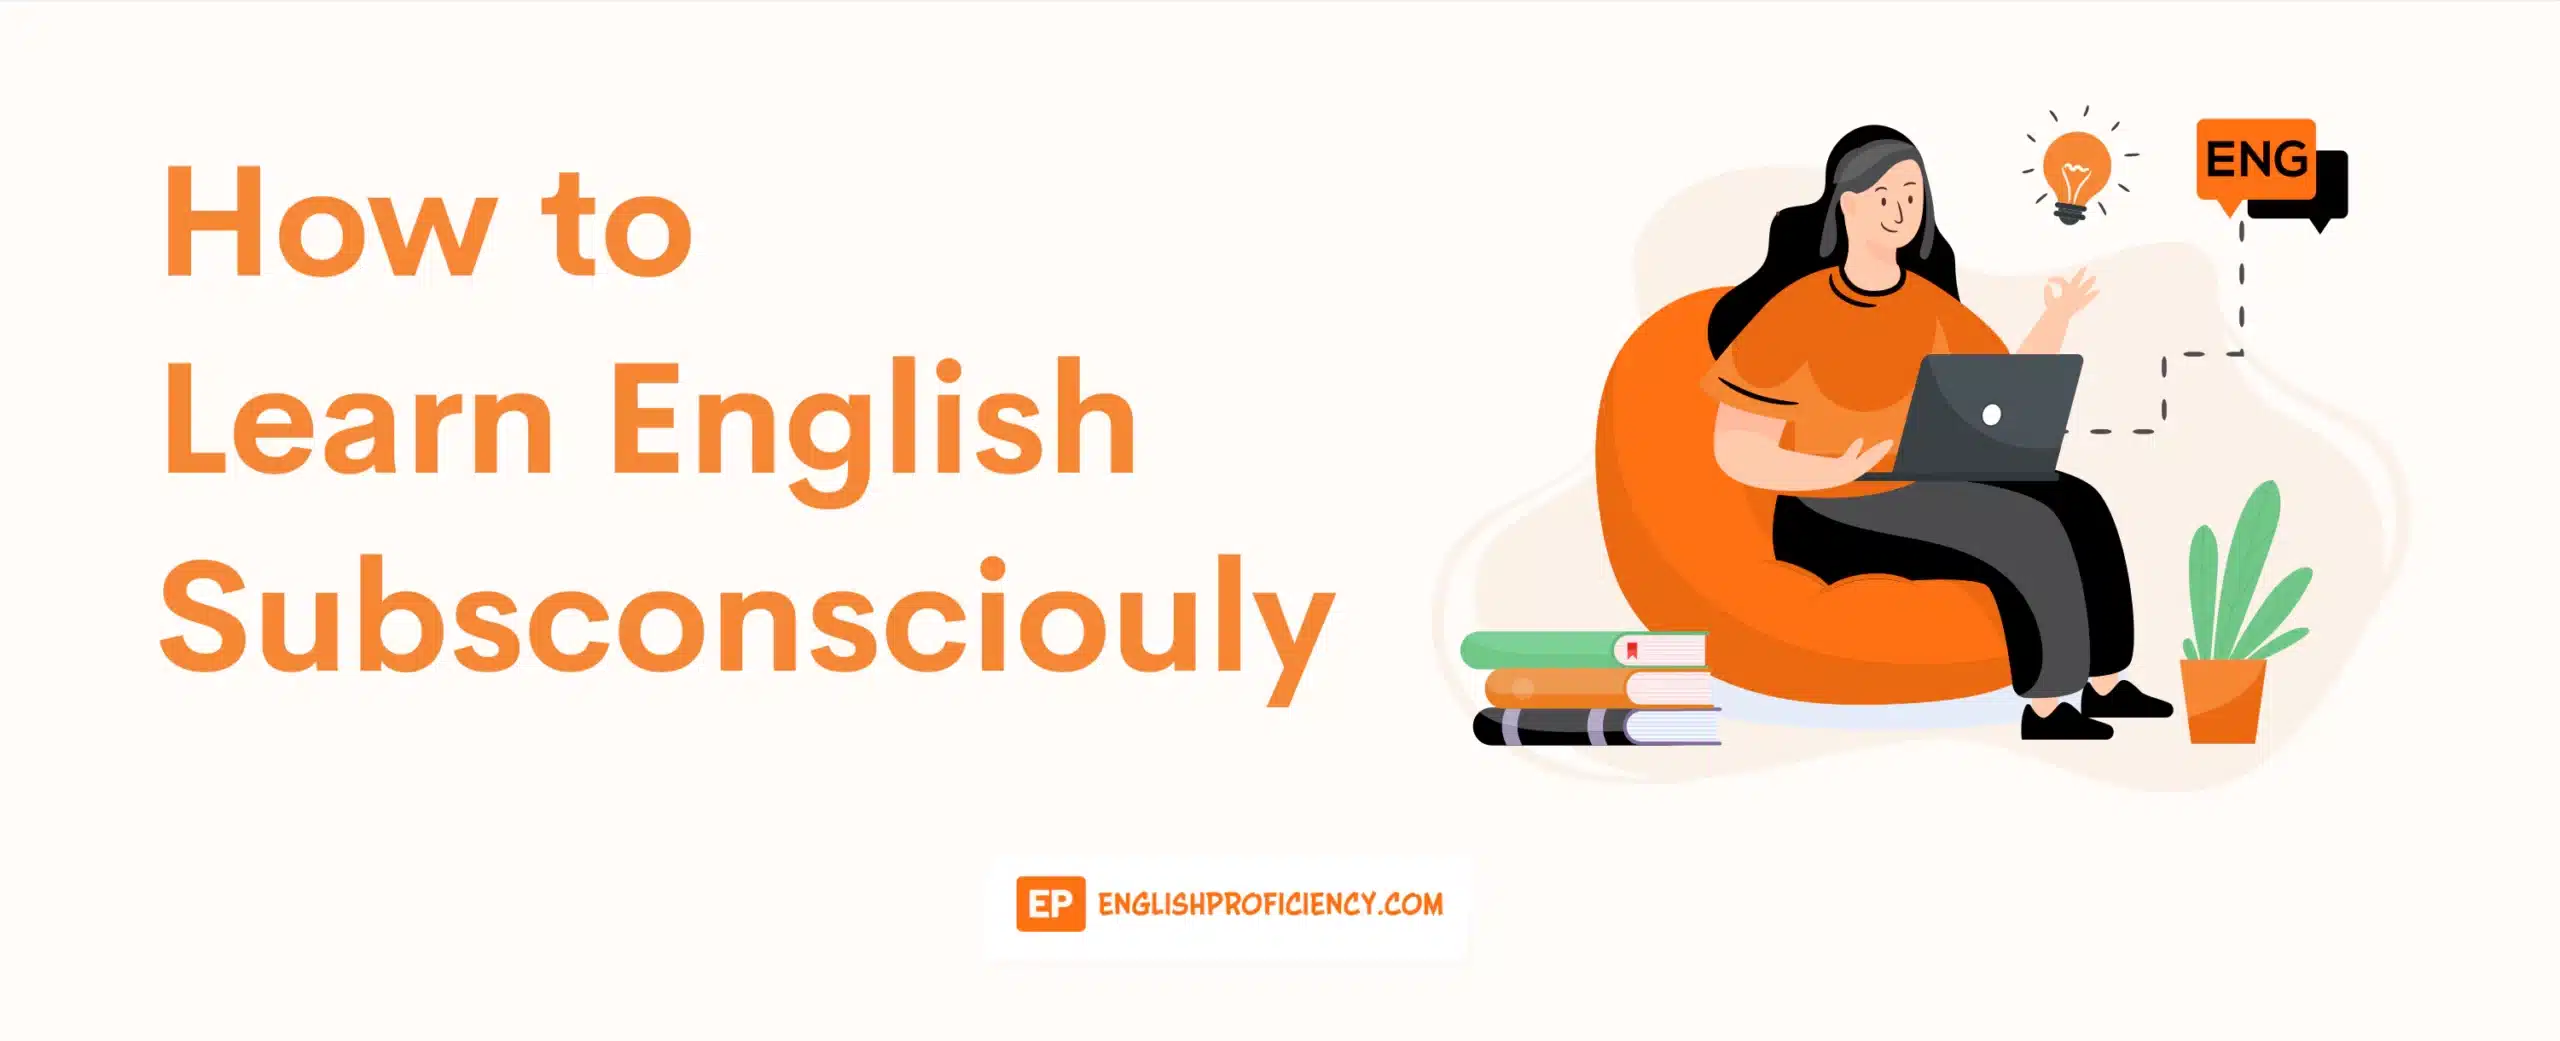 How to Learn English Subconsciously